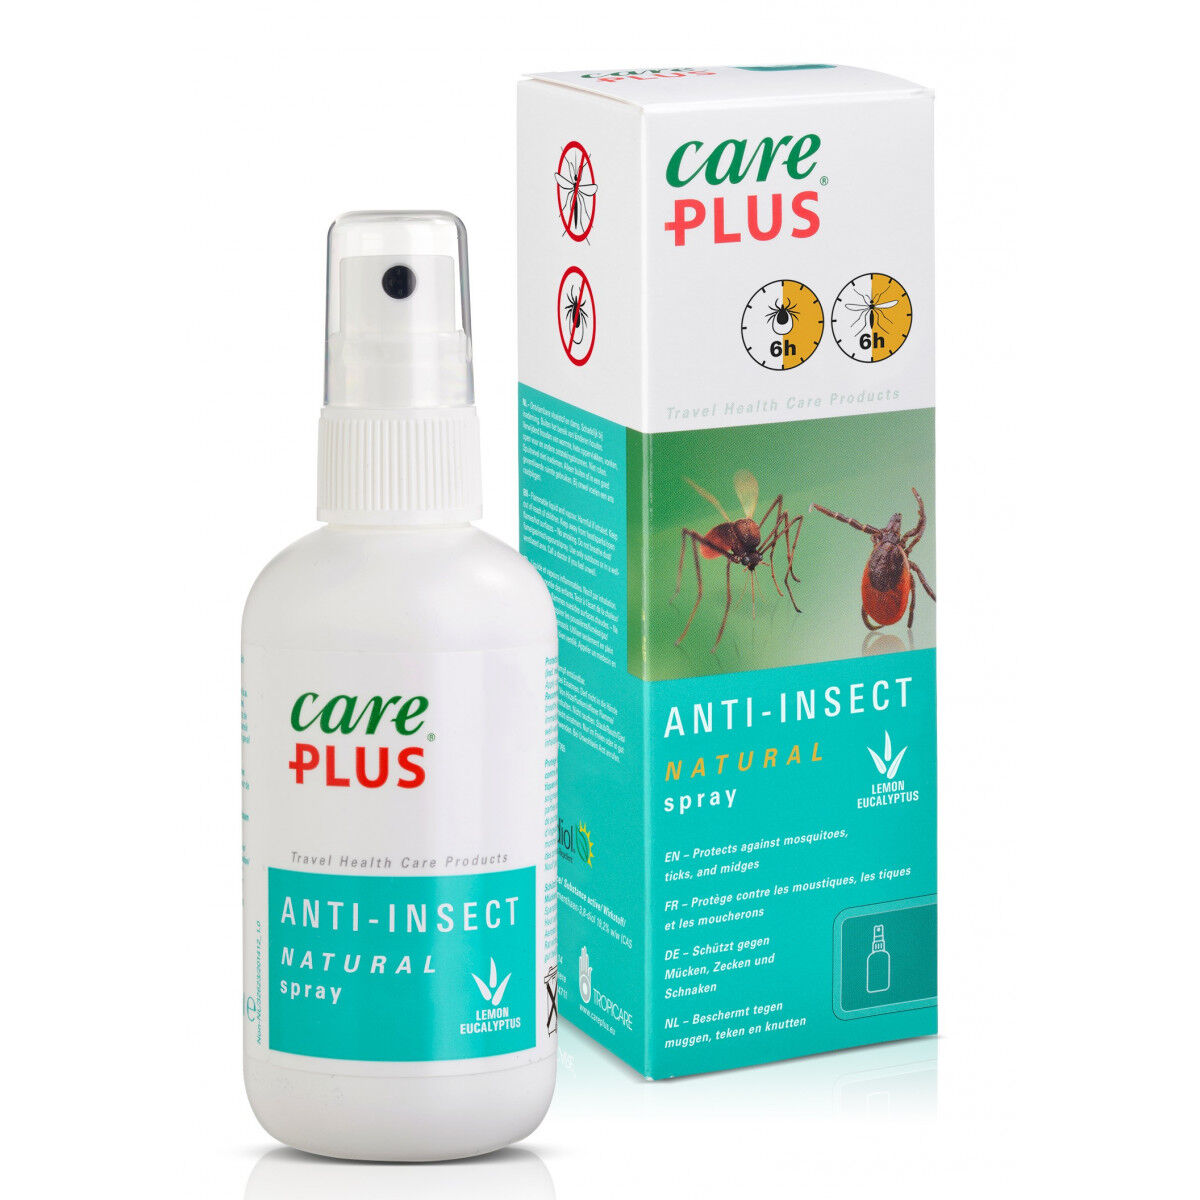 Care Plus Anti-Insect - Natural spray Citriodiol - Insektspray